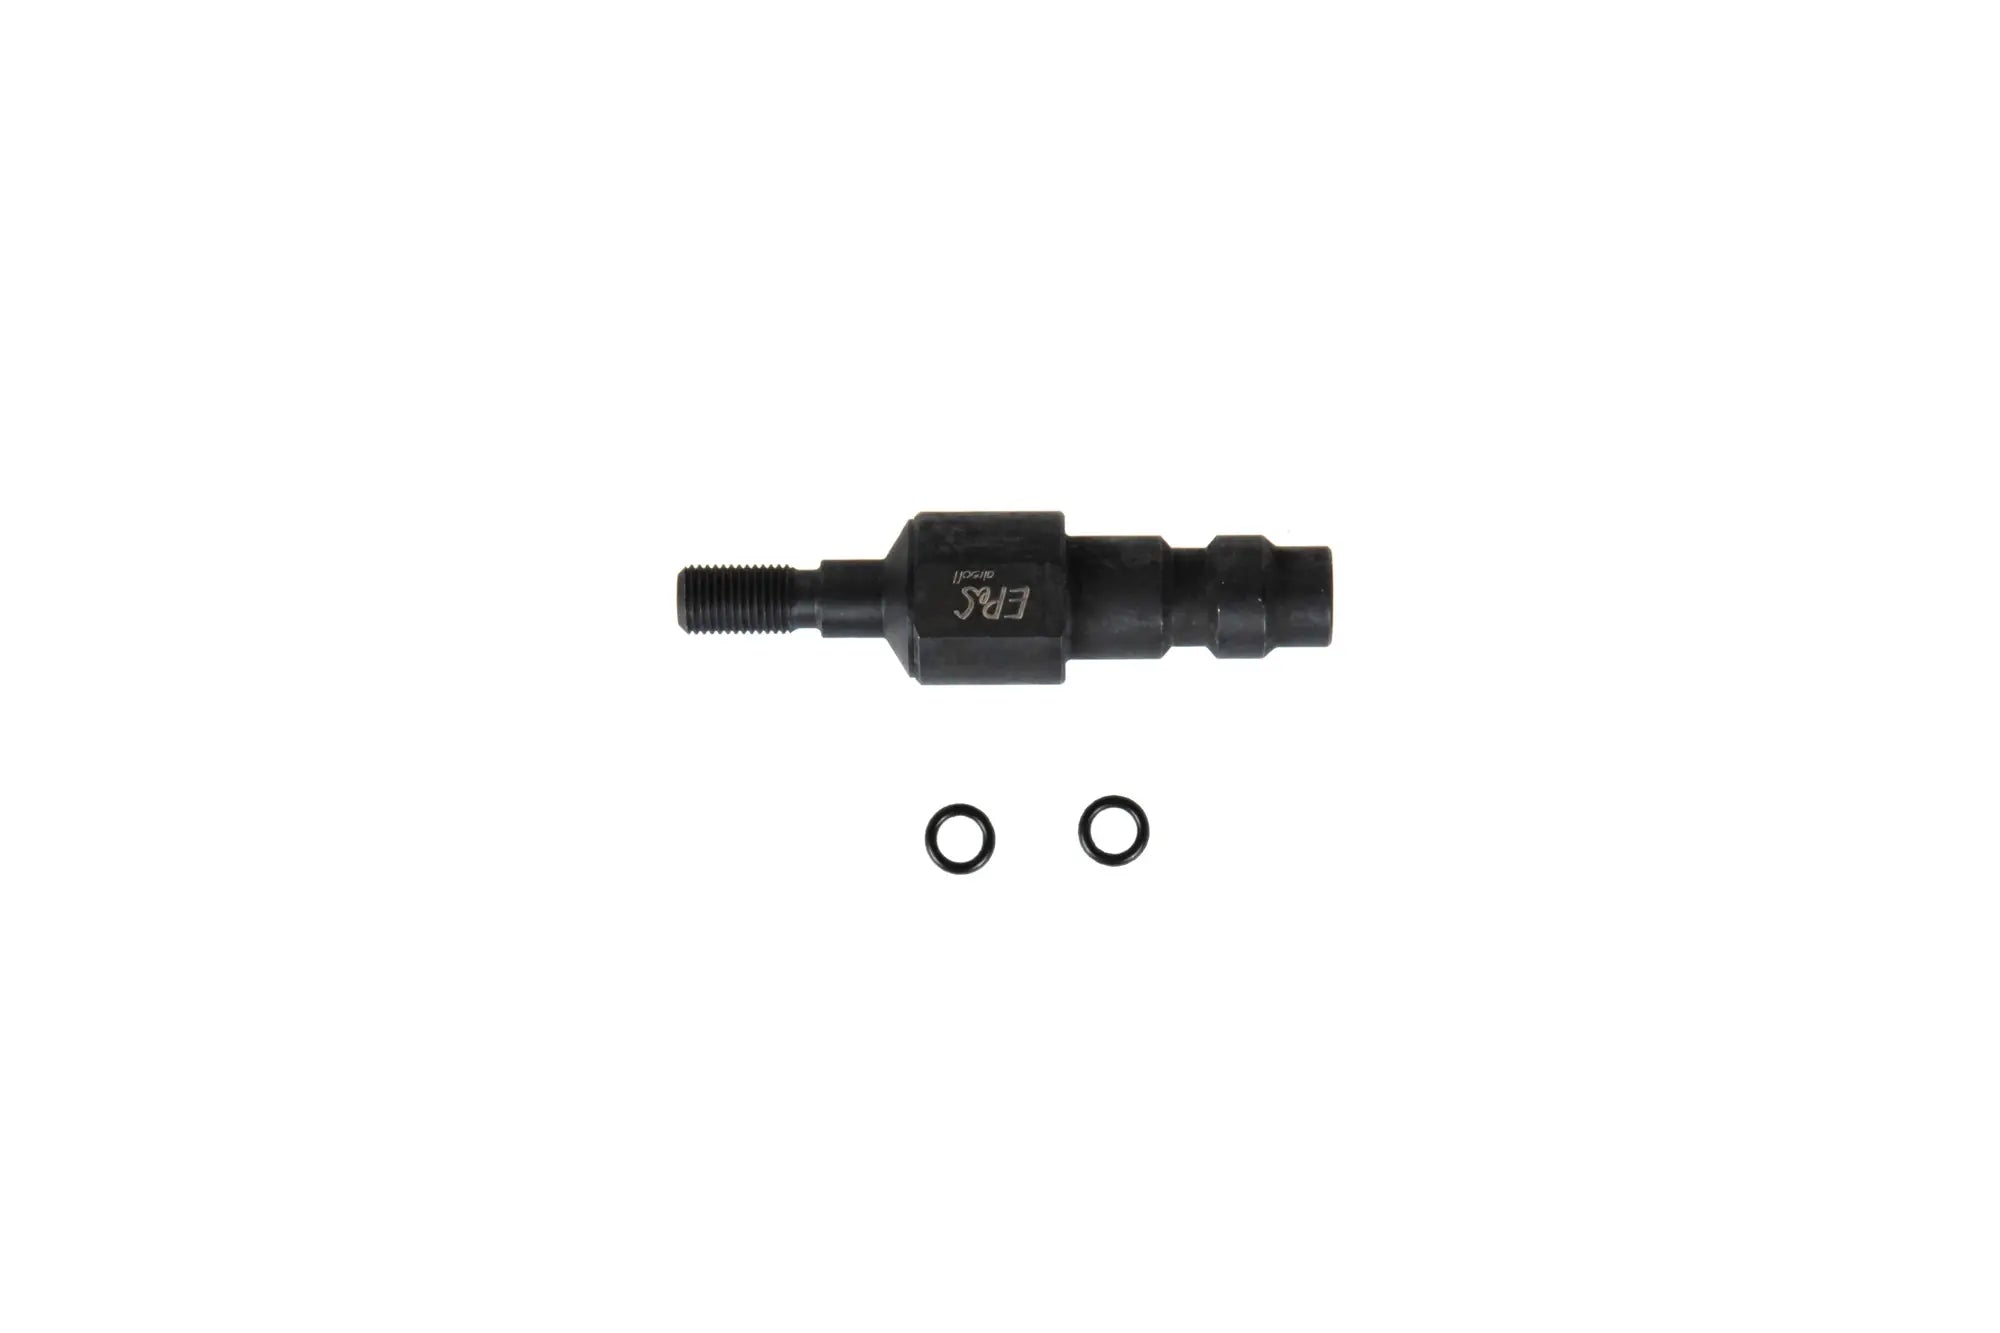 Adapter HPA to GBB SC (self closing) / E102-TM